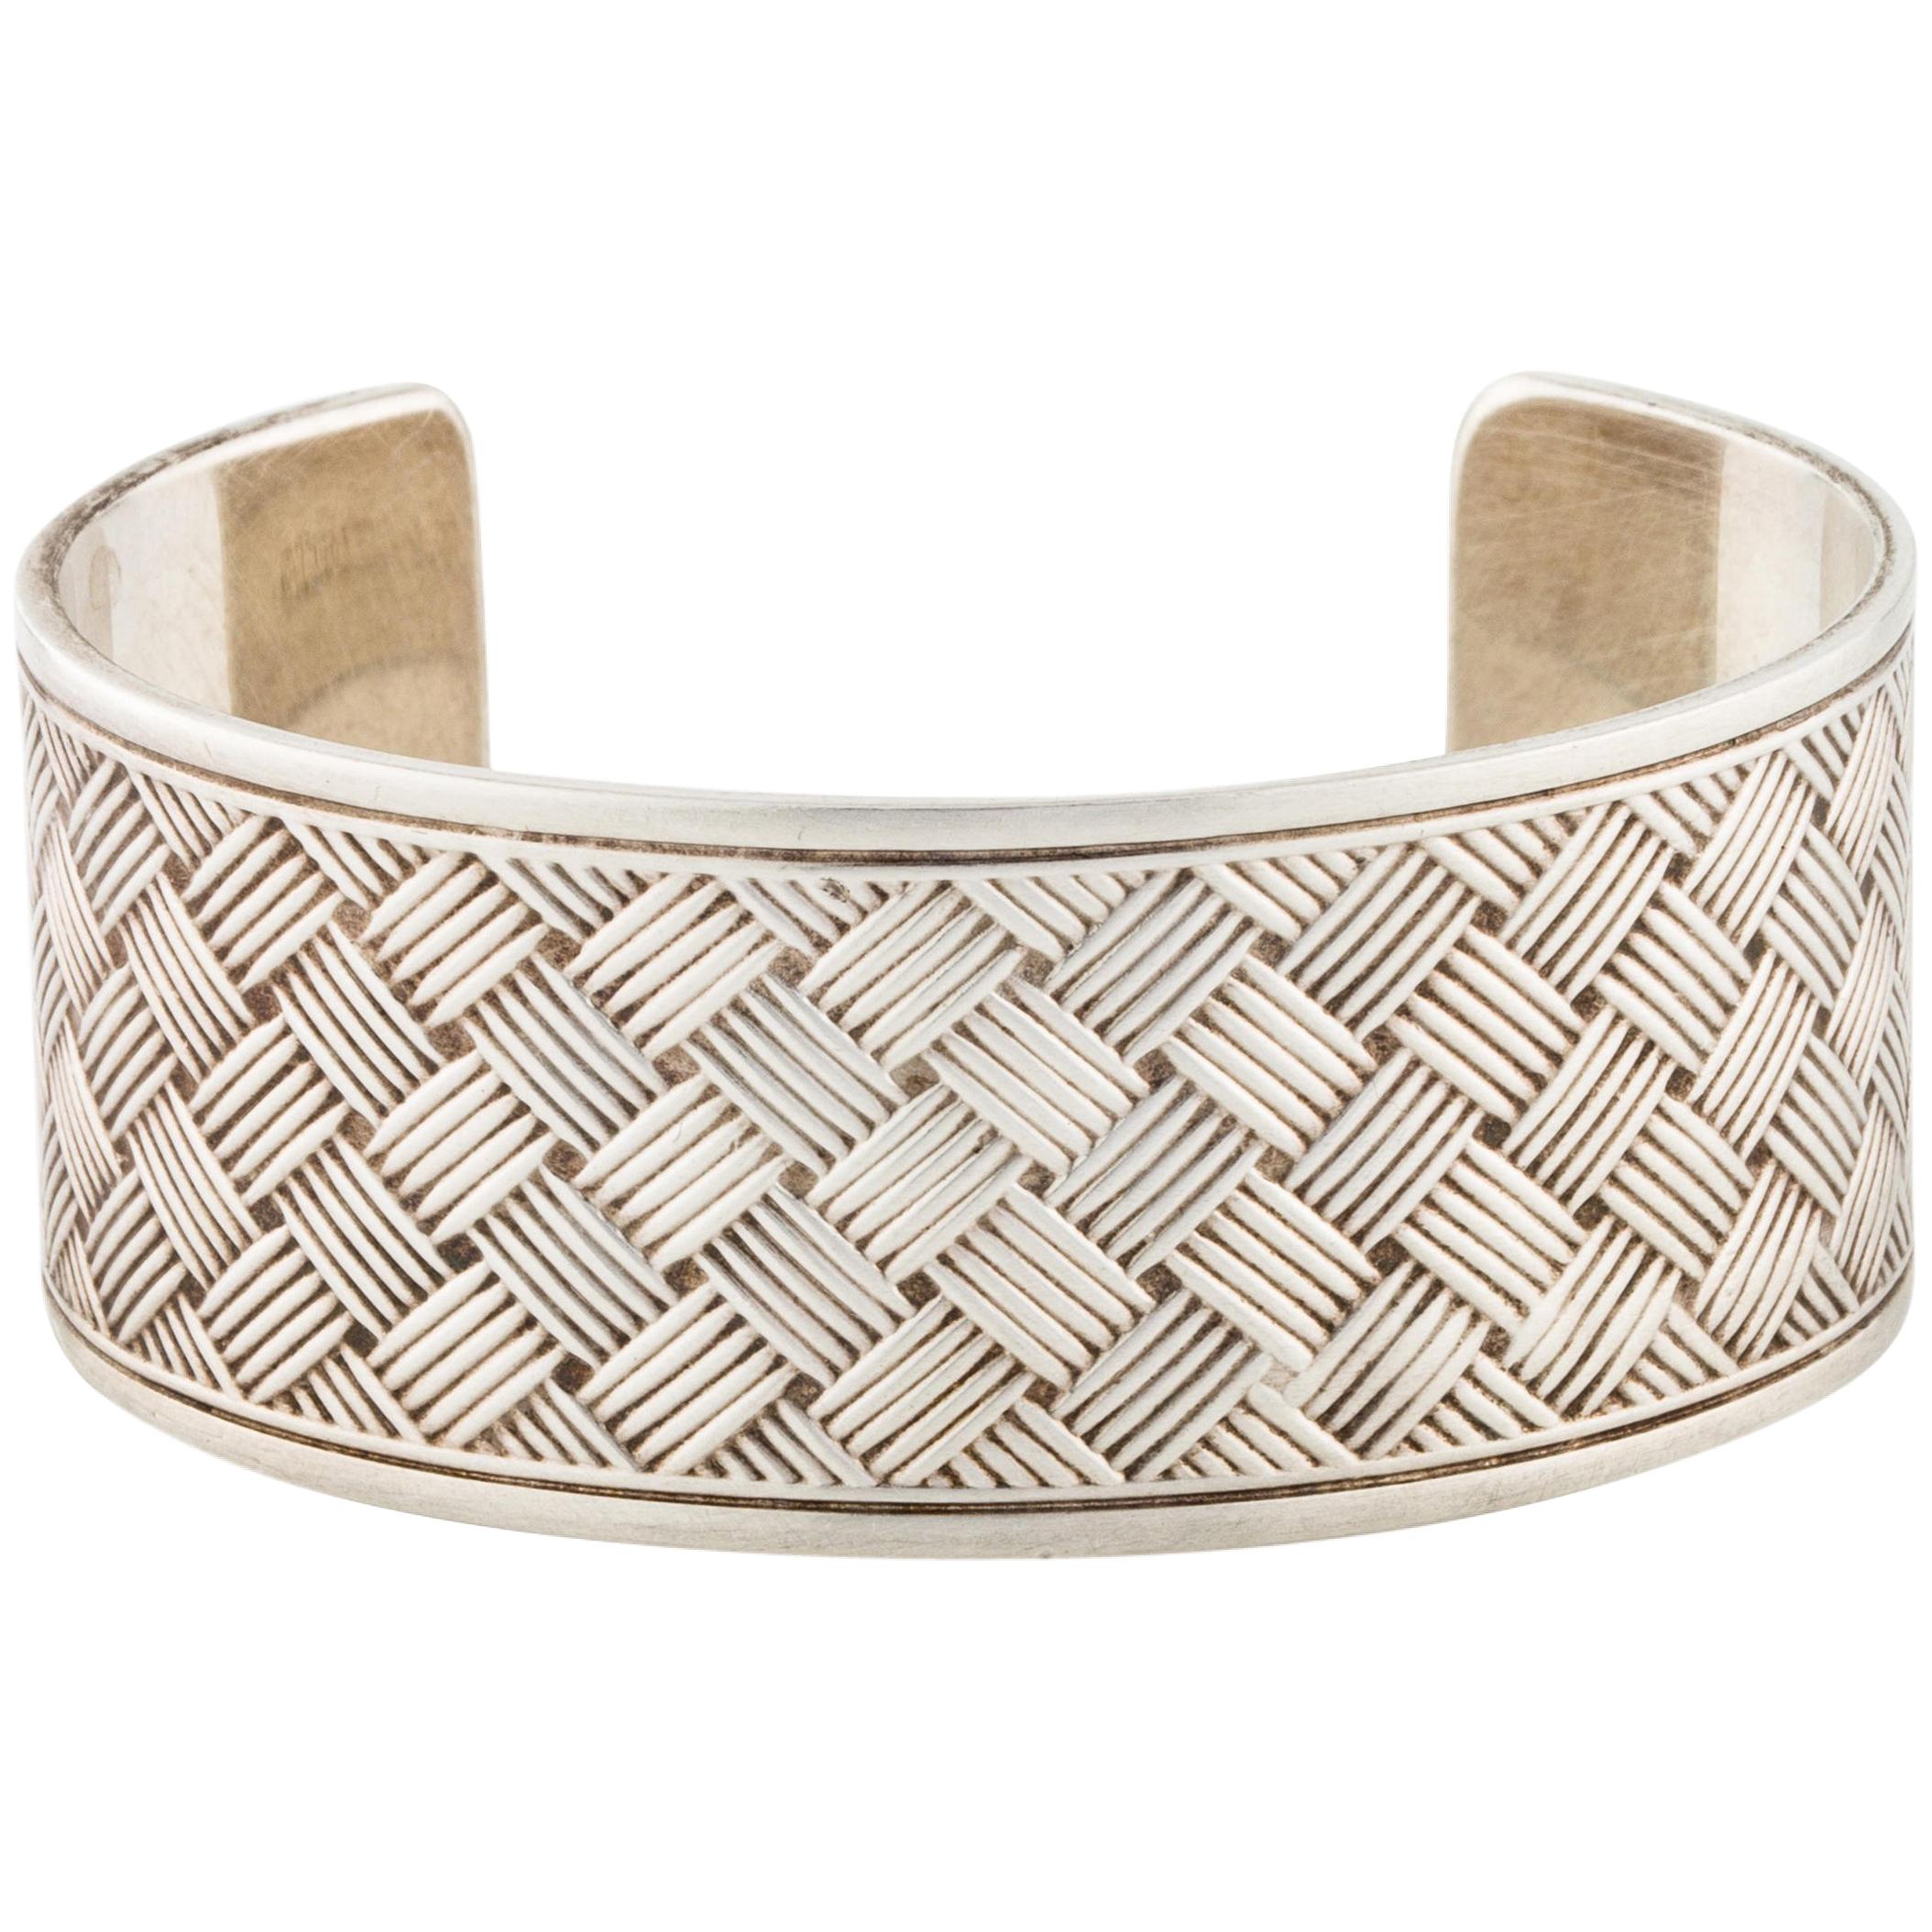 Tiffany & Co. Sterling Silver Textured Evening Wide Cuff Bracelet 